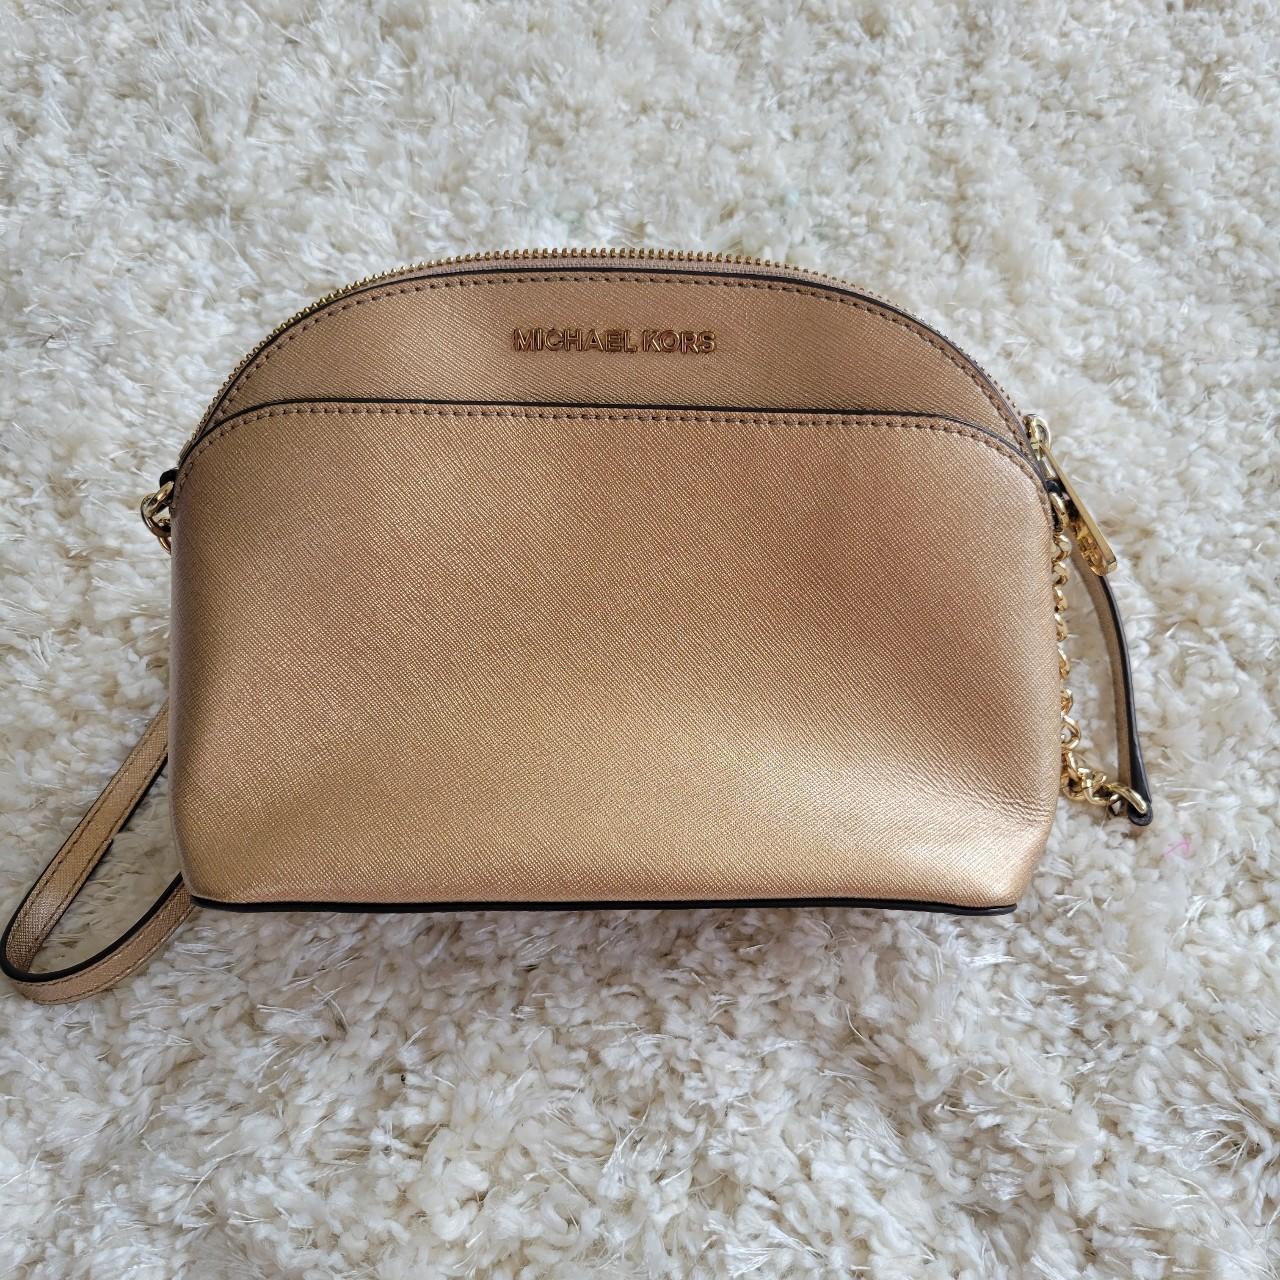 Michael Kors Rose Gold Crossbody Purse with Multiple Compartments